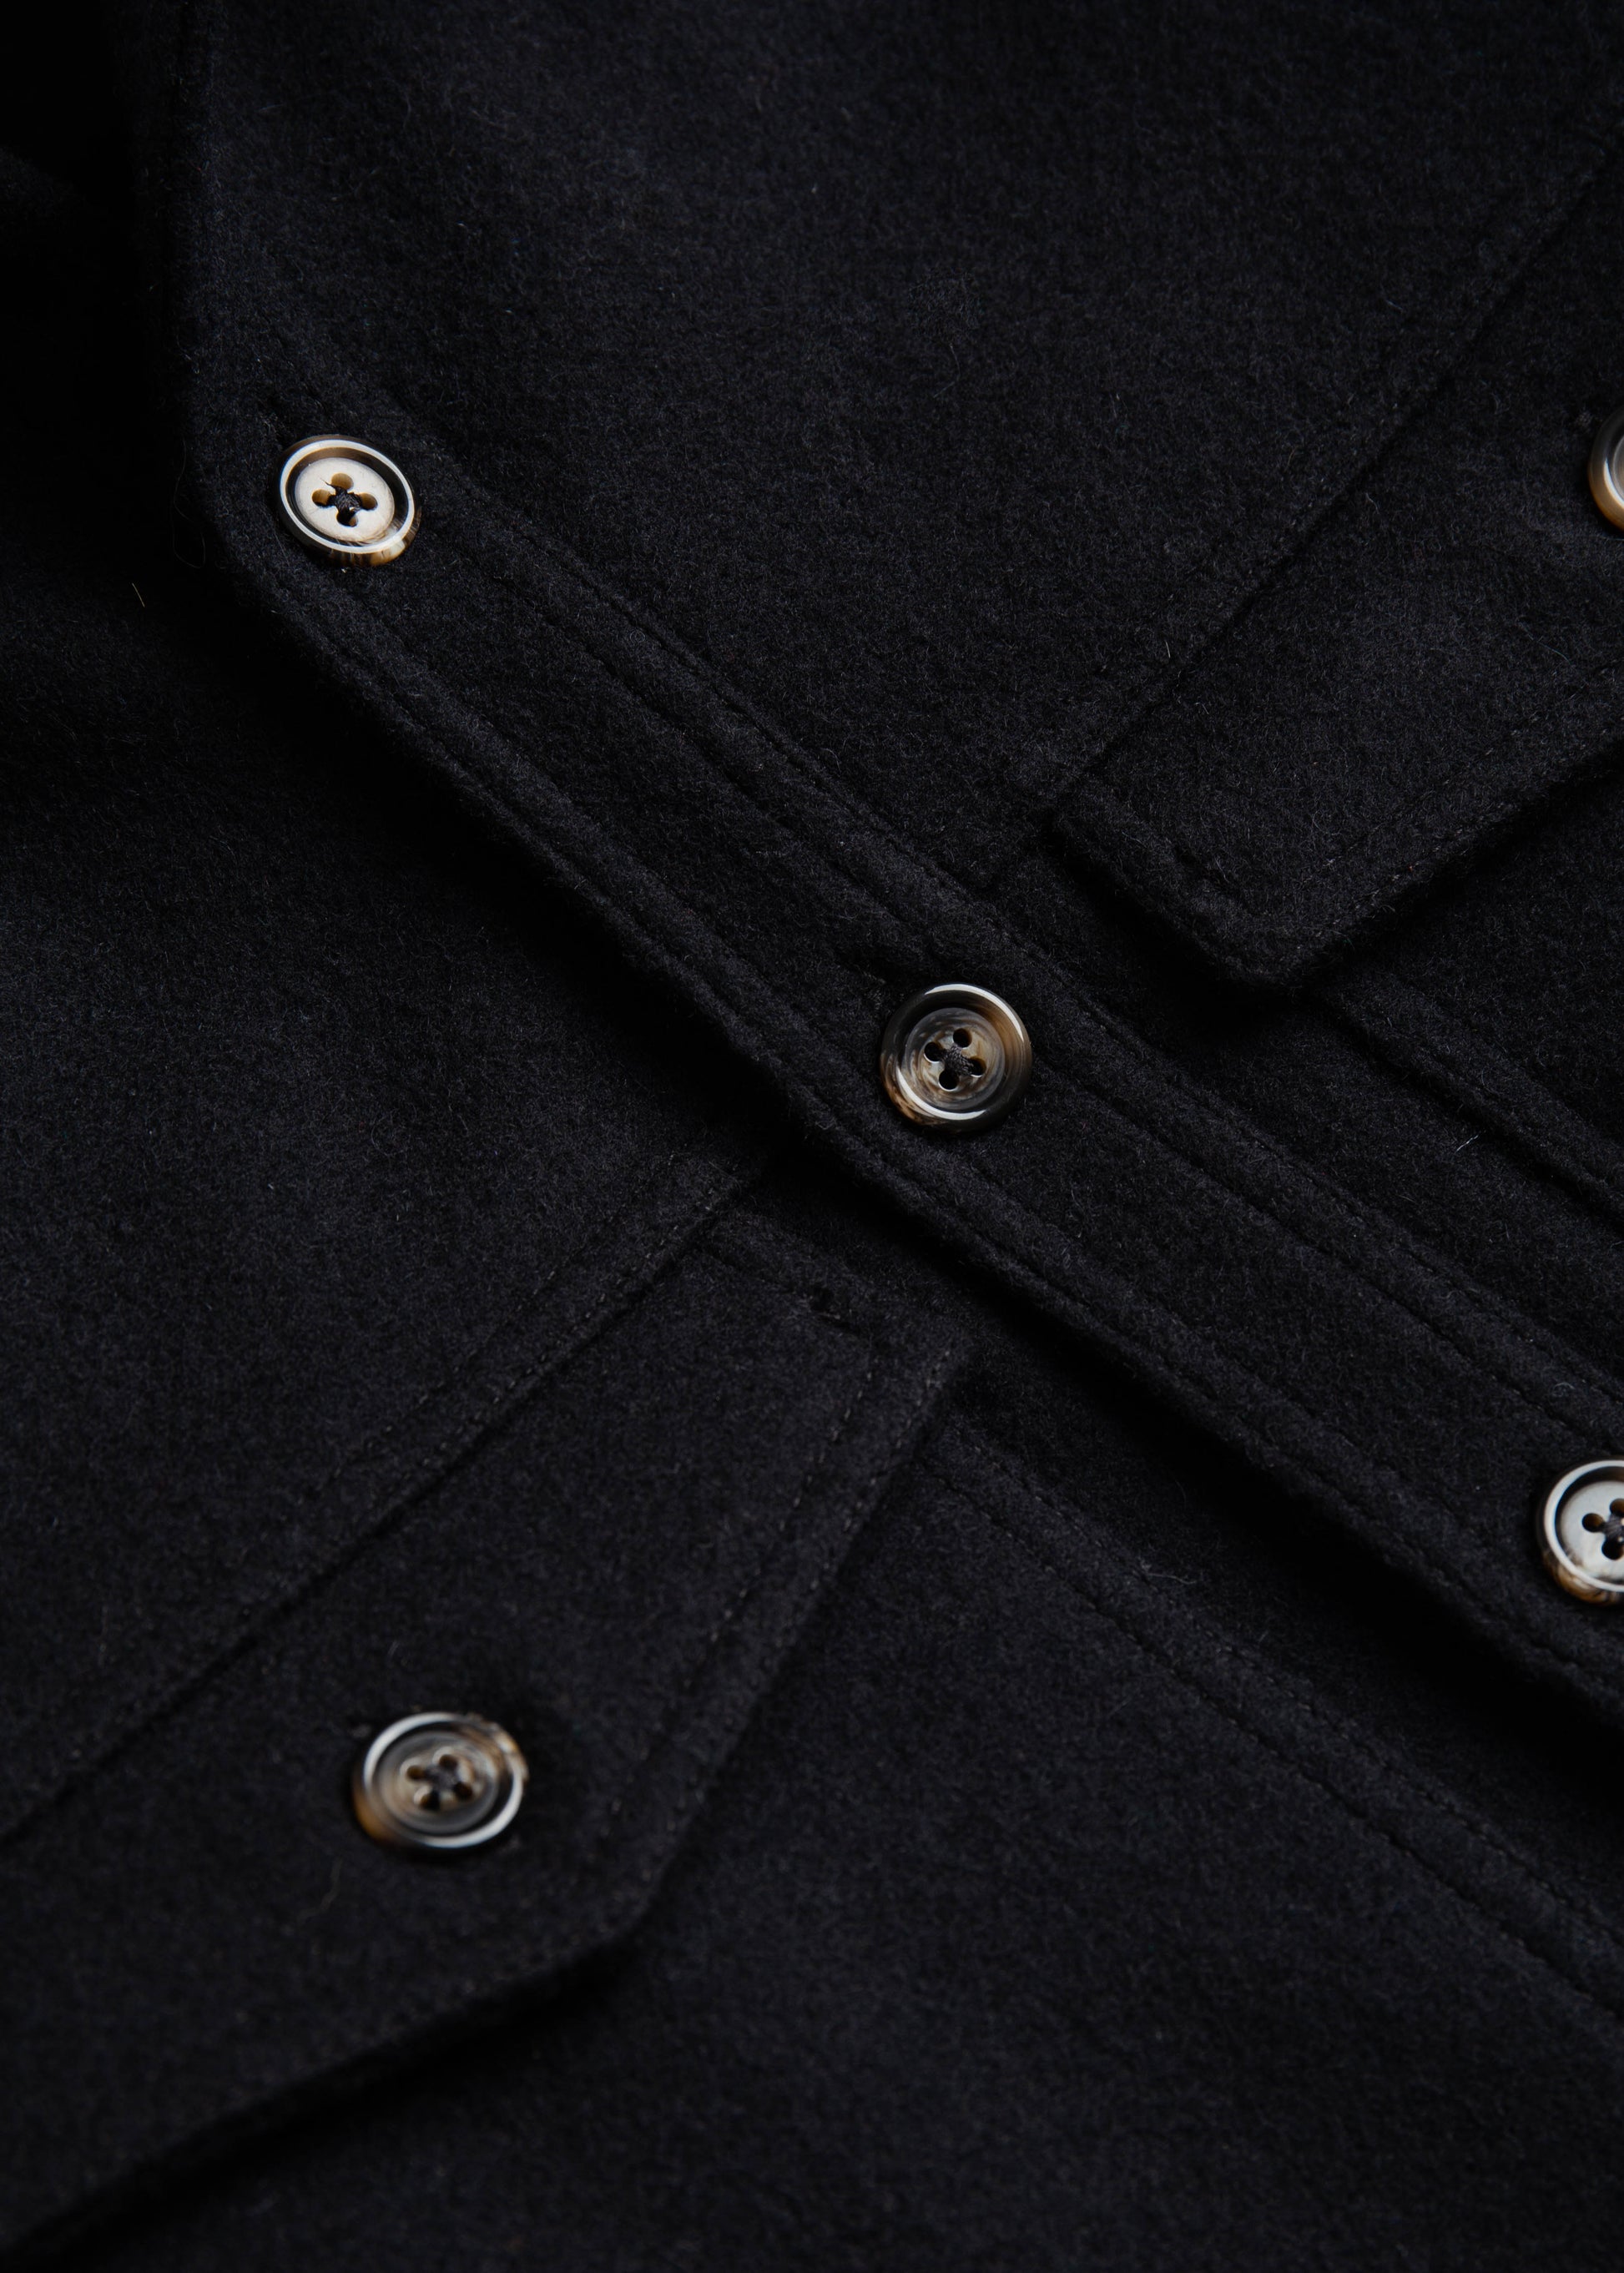 Front close up of buttons and fabric on the double pocket shirt jacket color black melton wool